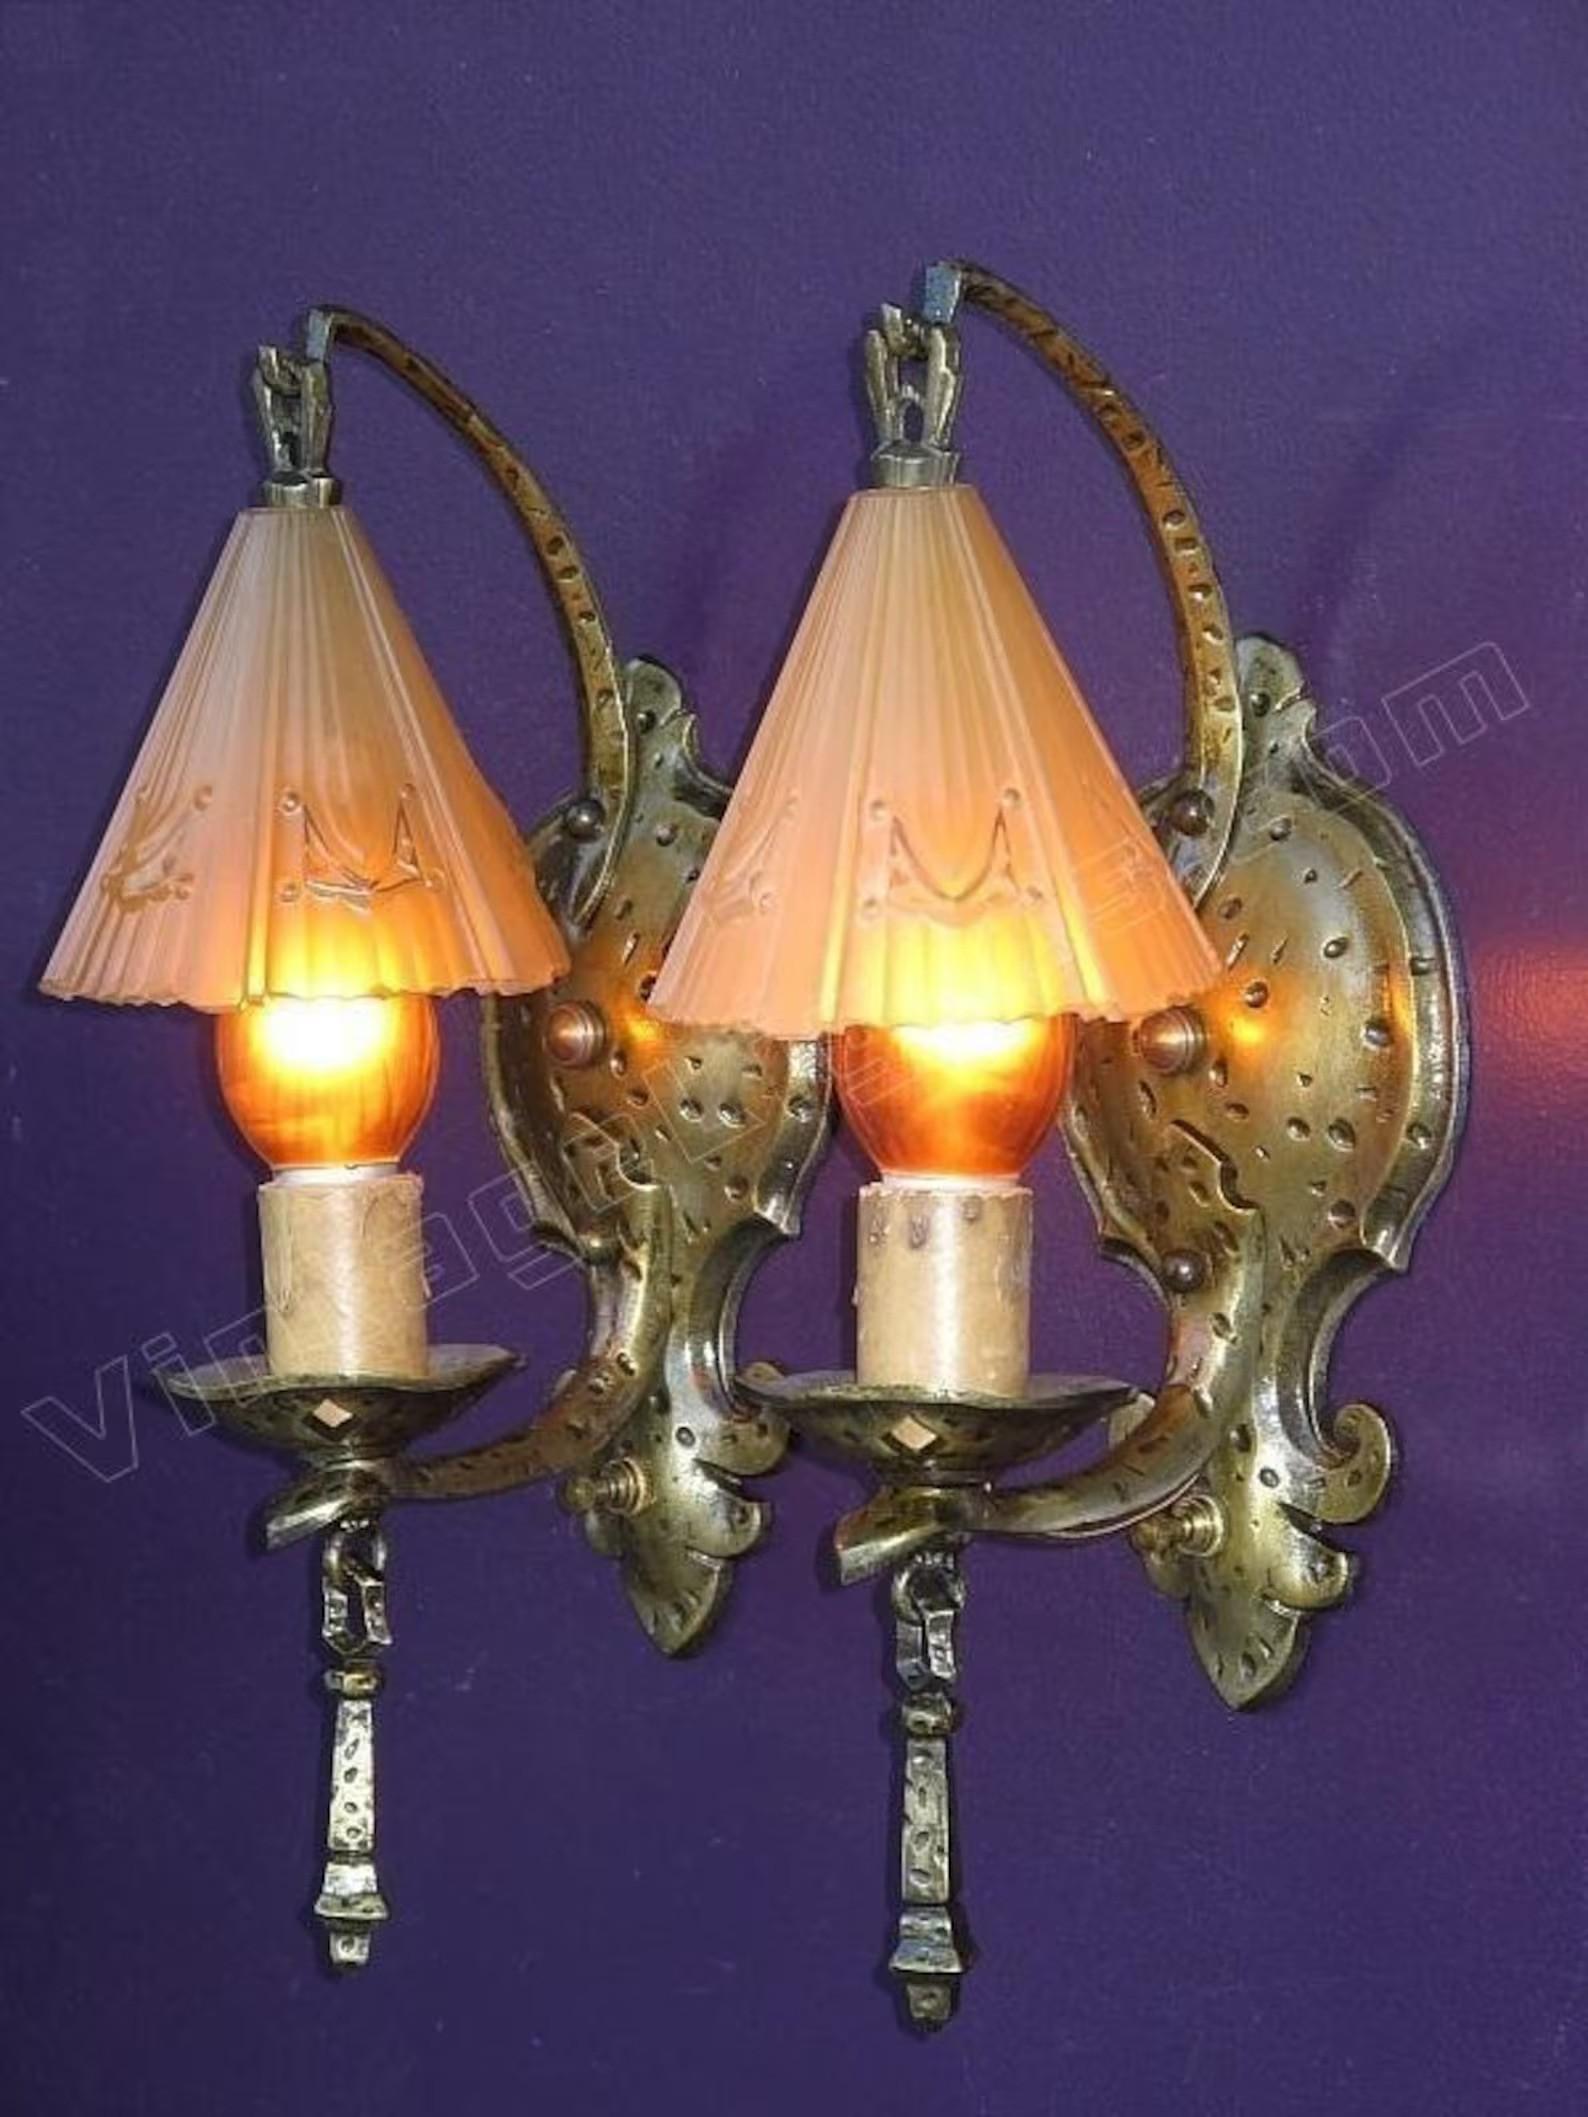 Cast Vintage Storybook Wall Sconces 1930s priced per pair with 3 pr avaiable For Sale